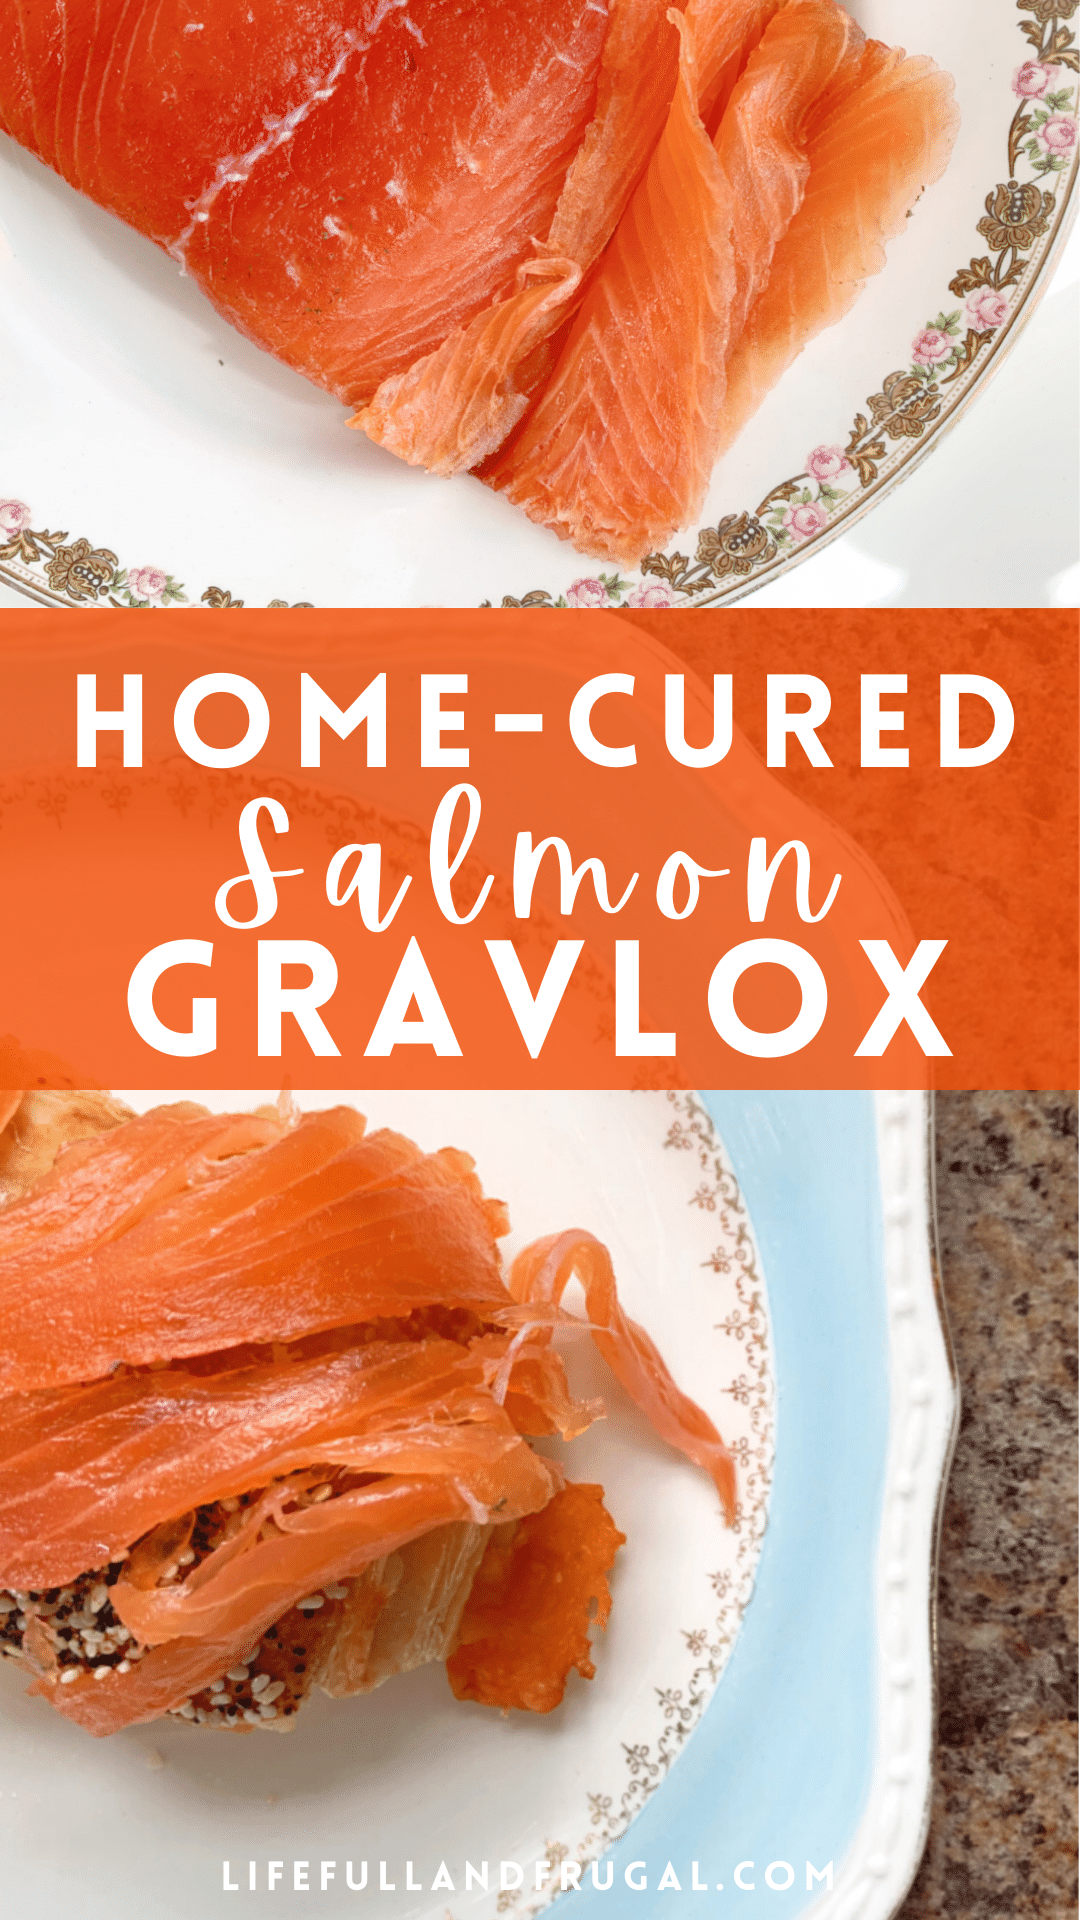 home-cured salmon gravlox pin life full and frugal